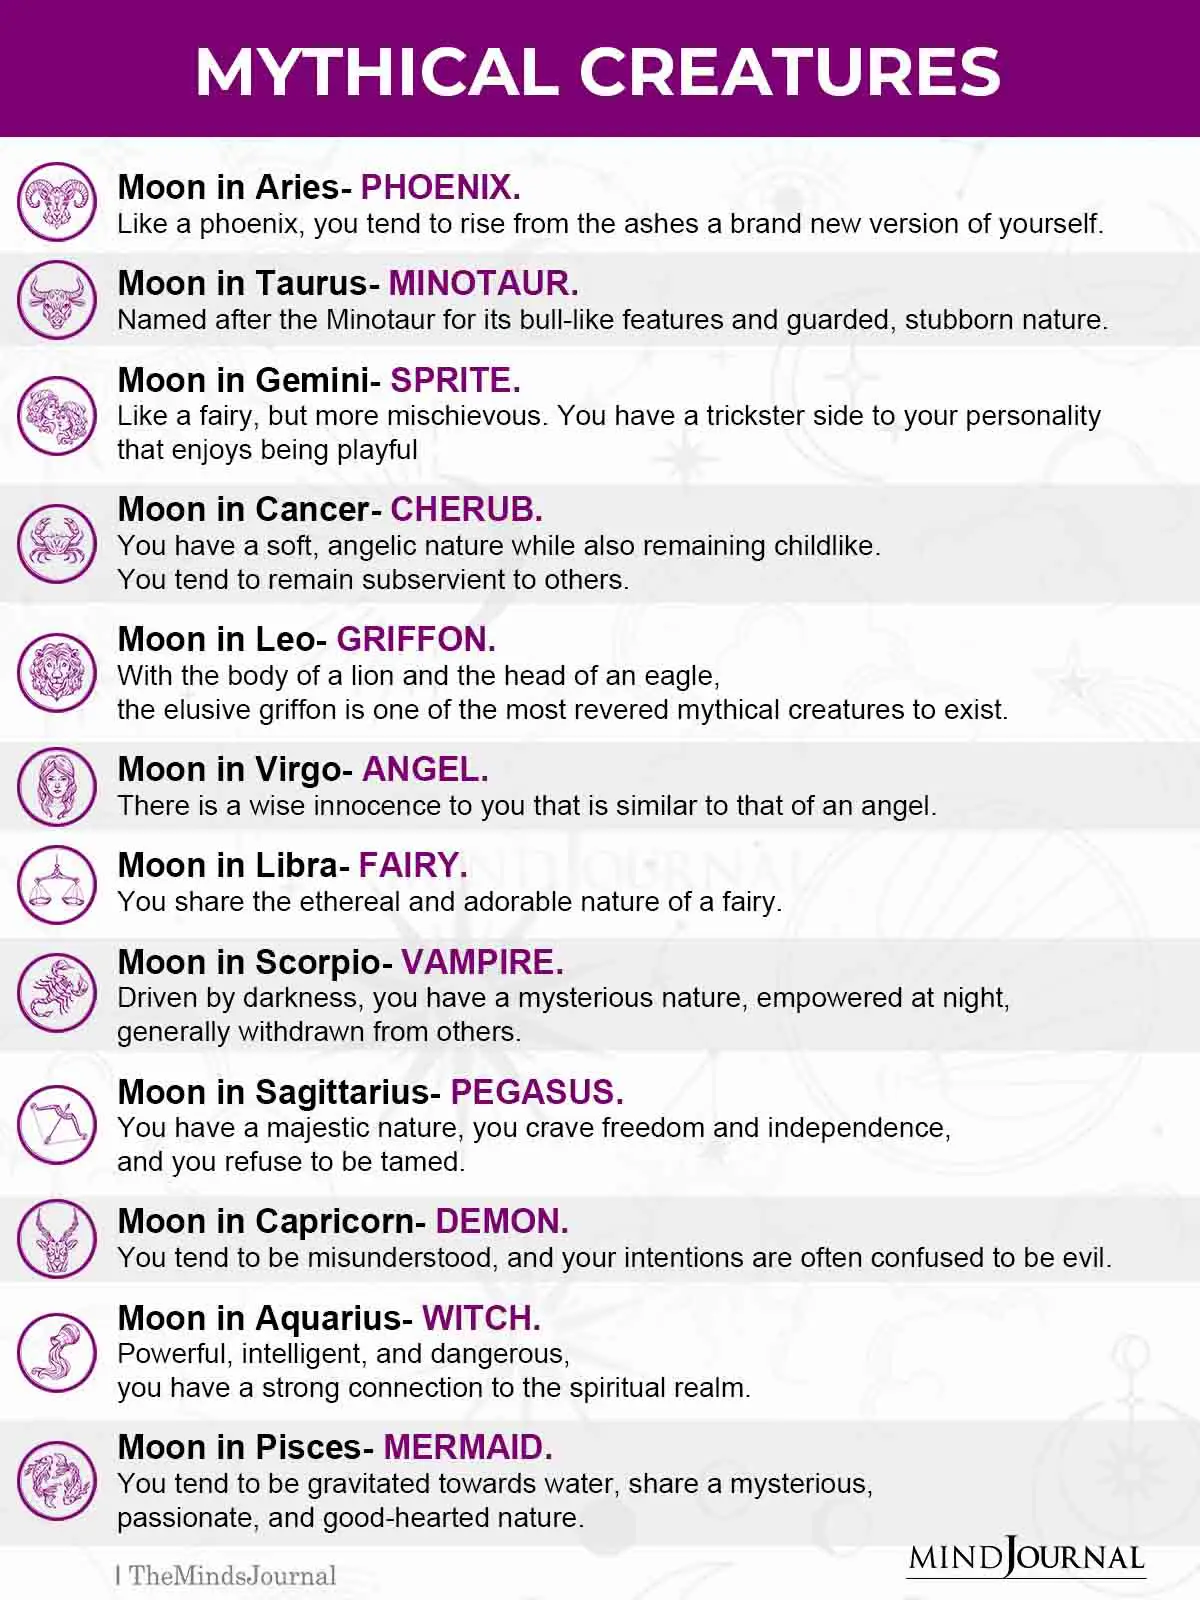 What Kind Of Mythical Creature Are You Based On Your Moon Sign